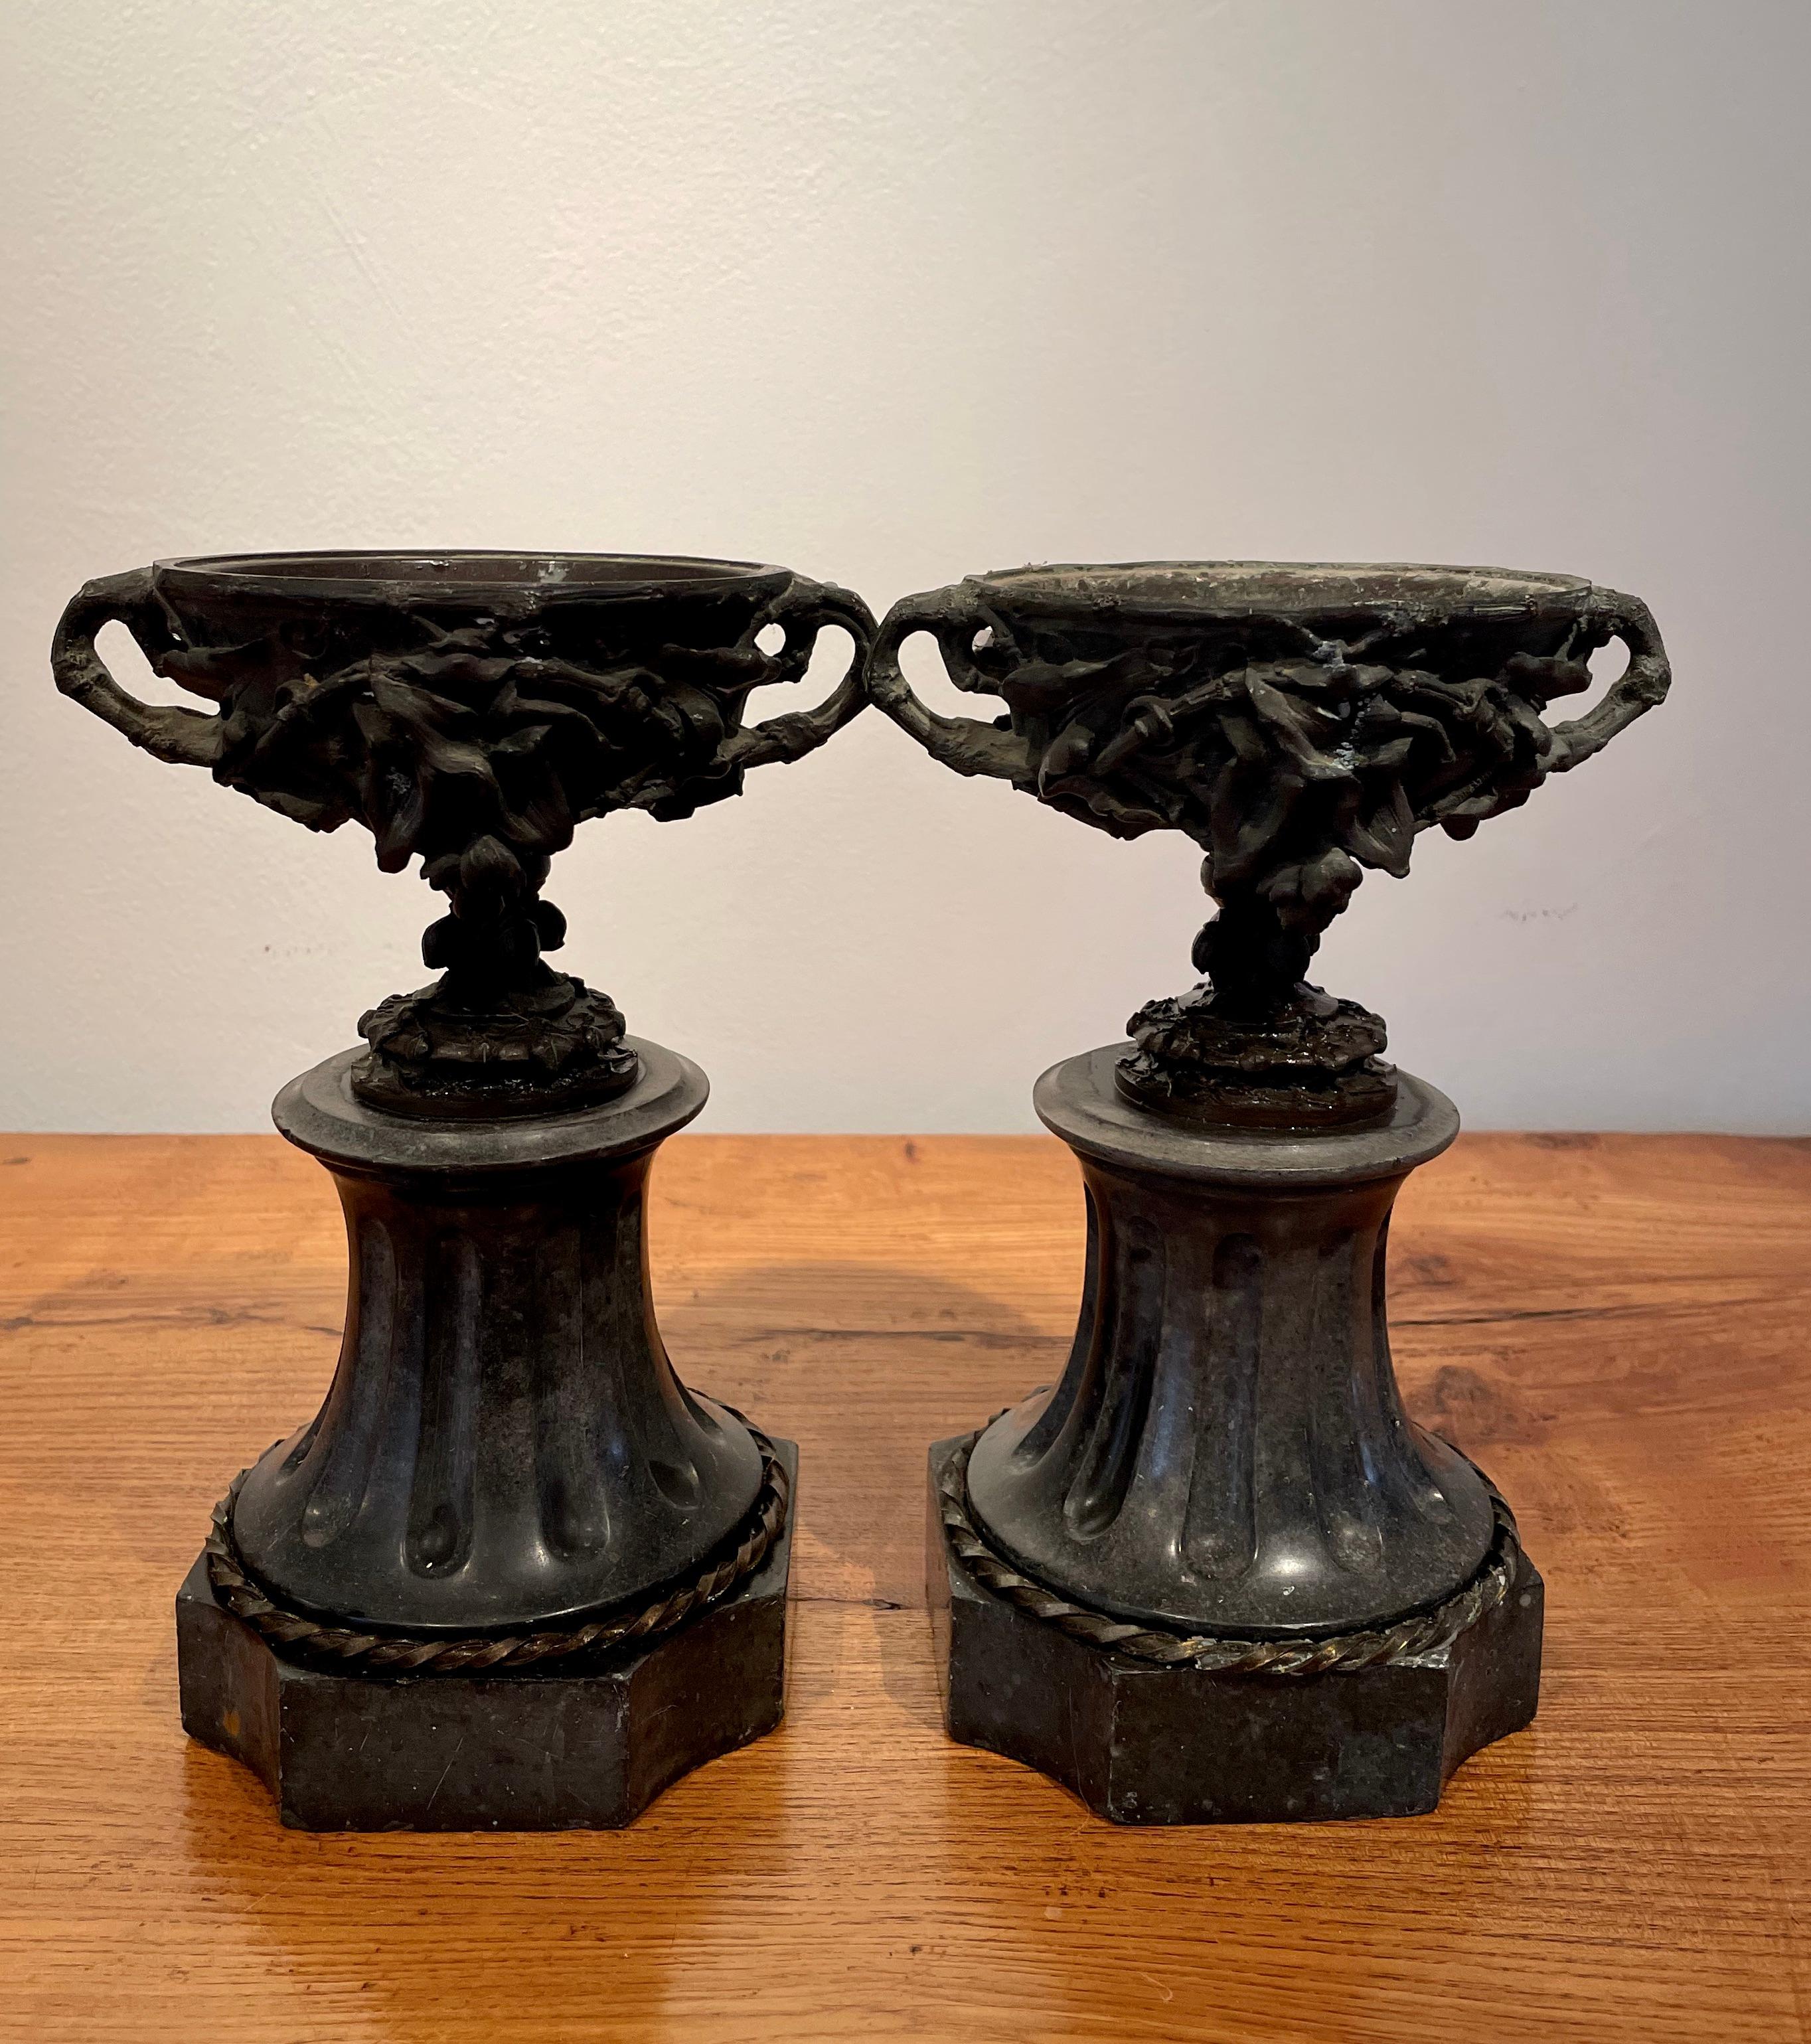 This pair of diminutive garniture urns is just sensational. The intricate and deeply-cast bronze urns are shaped identically to the famous Warwick urn and feature fruit, flowers, and elaborate swags in exquisite detail. Mounted on deeply-reeded and